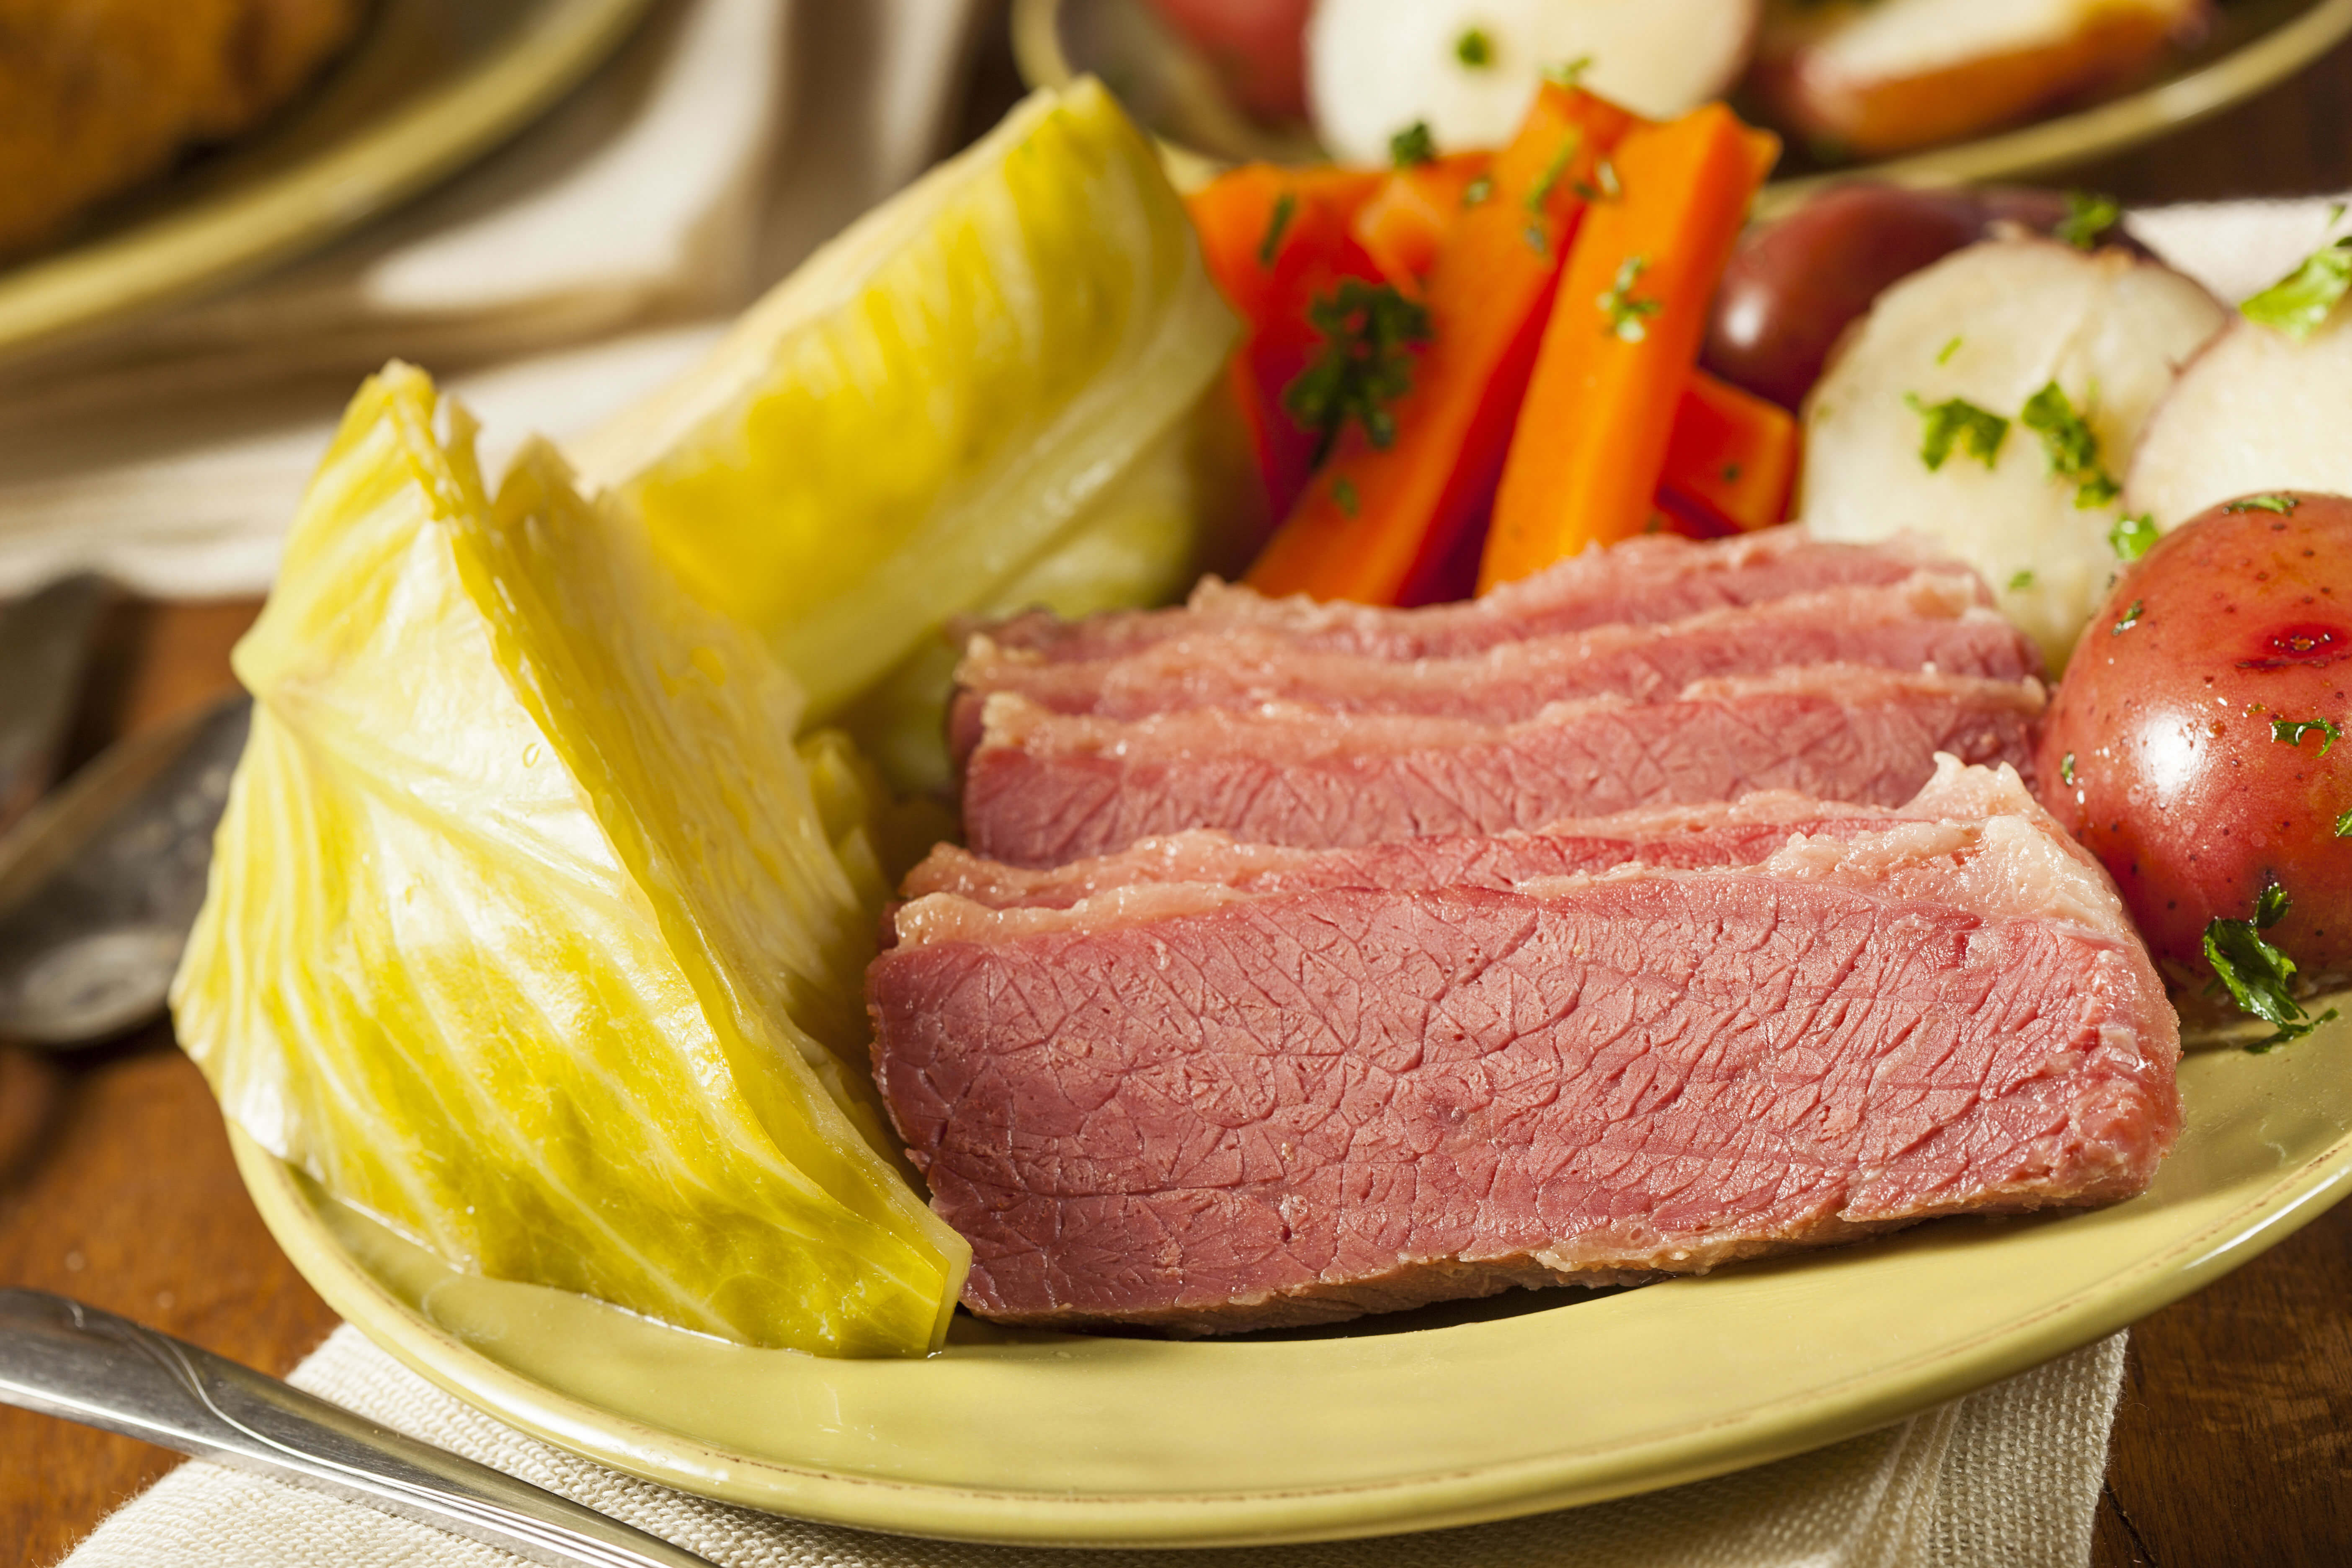 St. Patrick's Day Traditions & Corned Beef & Cabbage Recipe